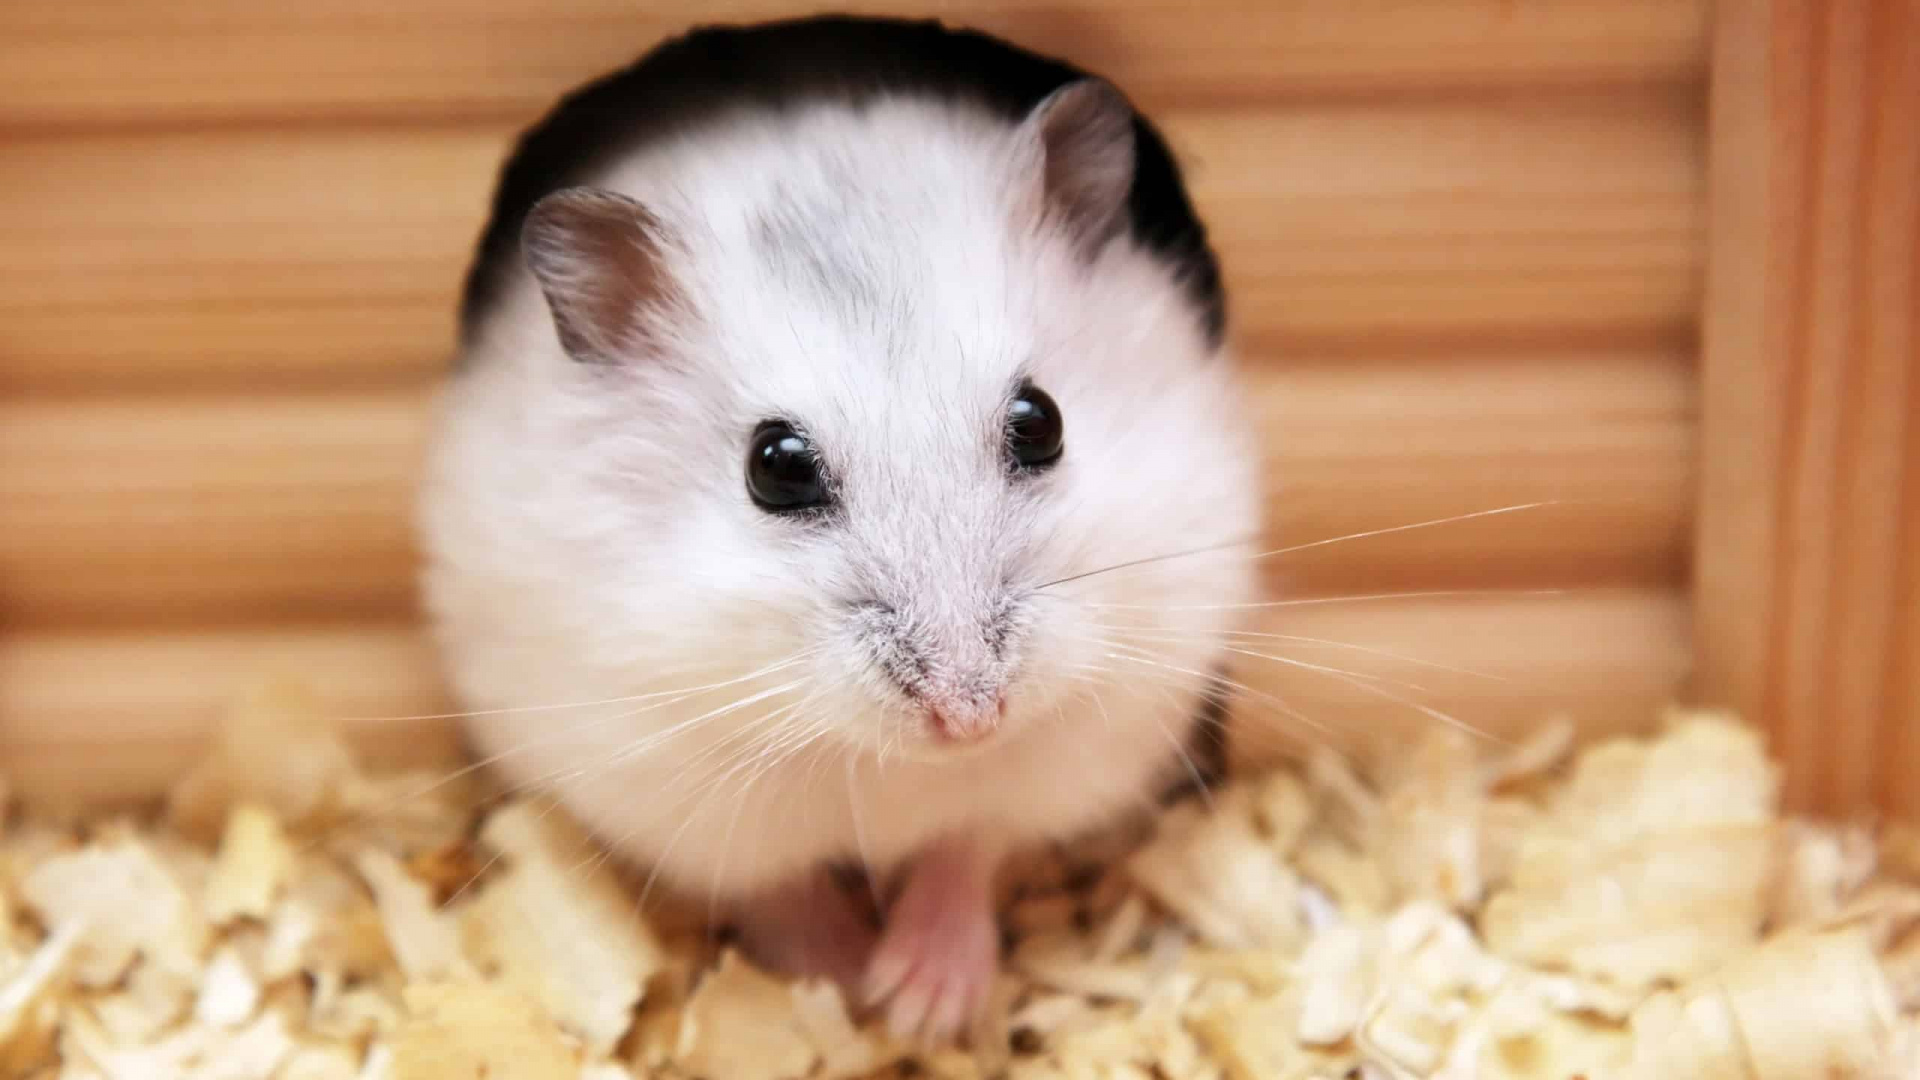 White and Brown Hamster on Brown Wooden Table. Wallpaper in 1920x1080 Resolution